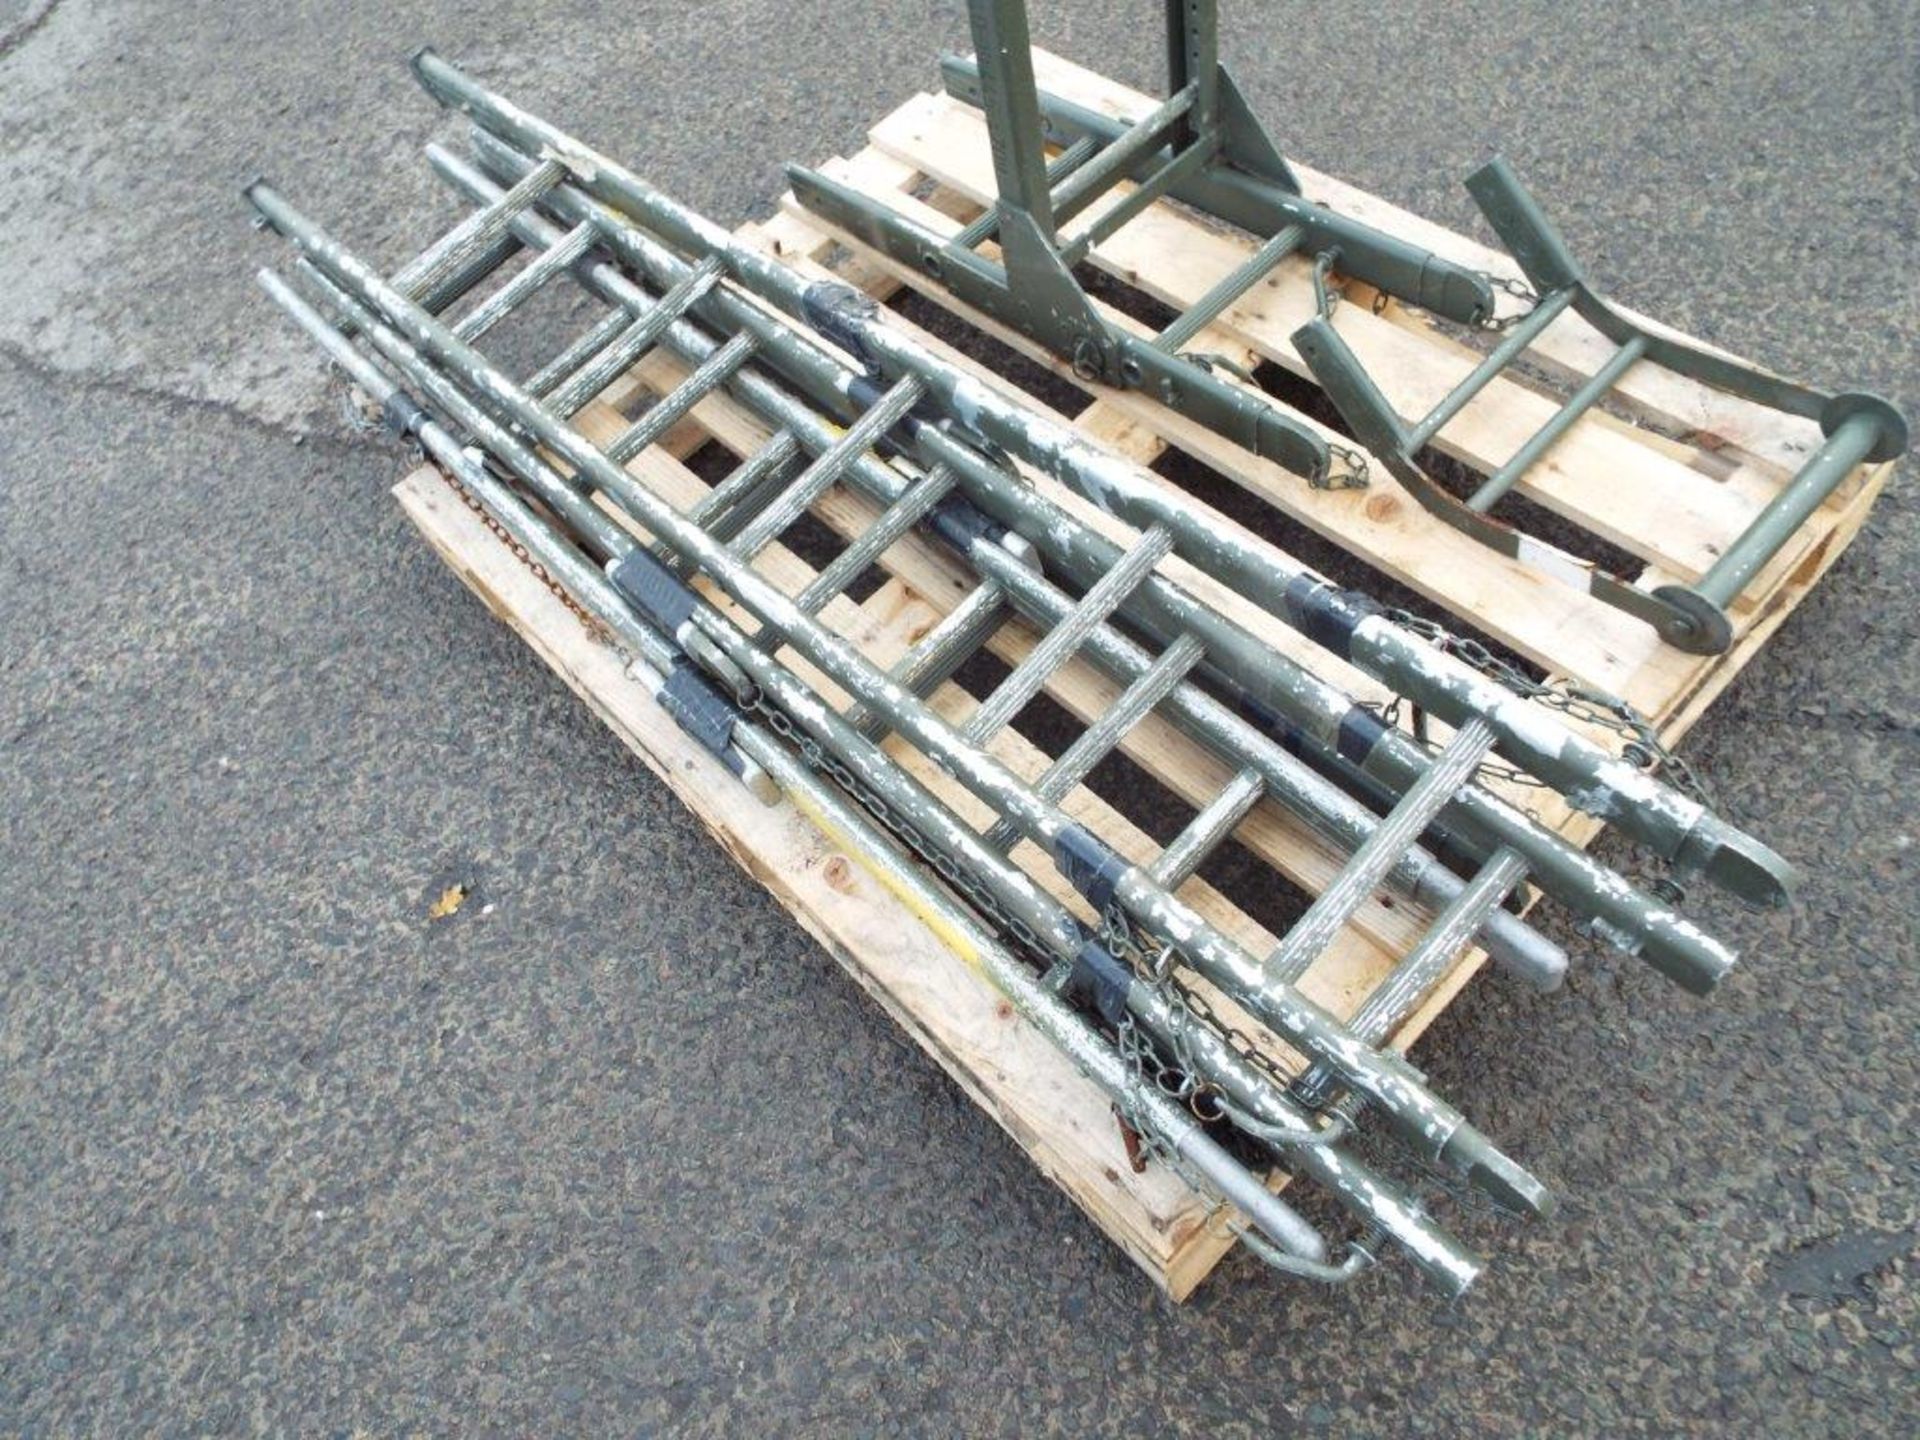 4 Section Military Aluminium Scaling/Assault Ladder with Ridge Hook and Roller Attachments - Image 2 of 7